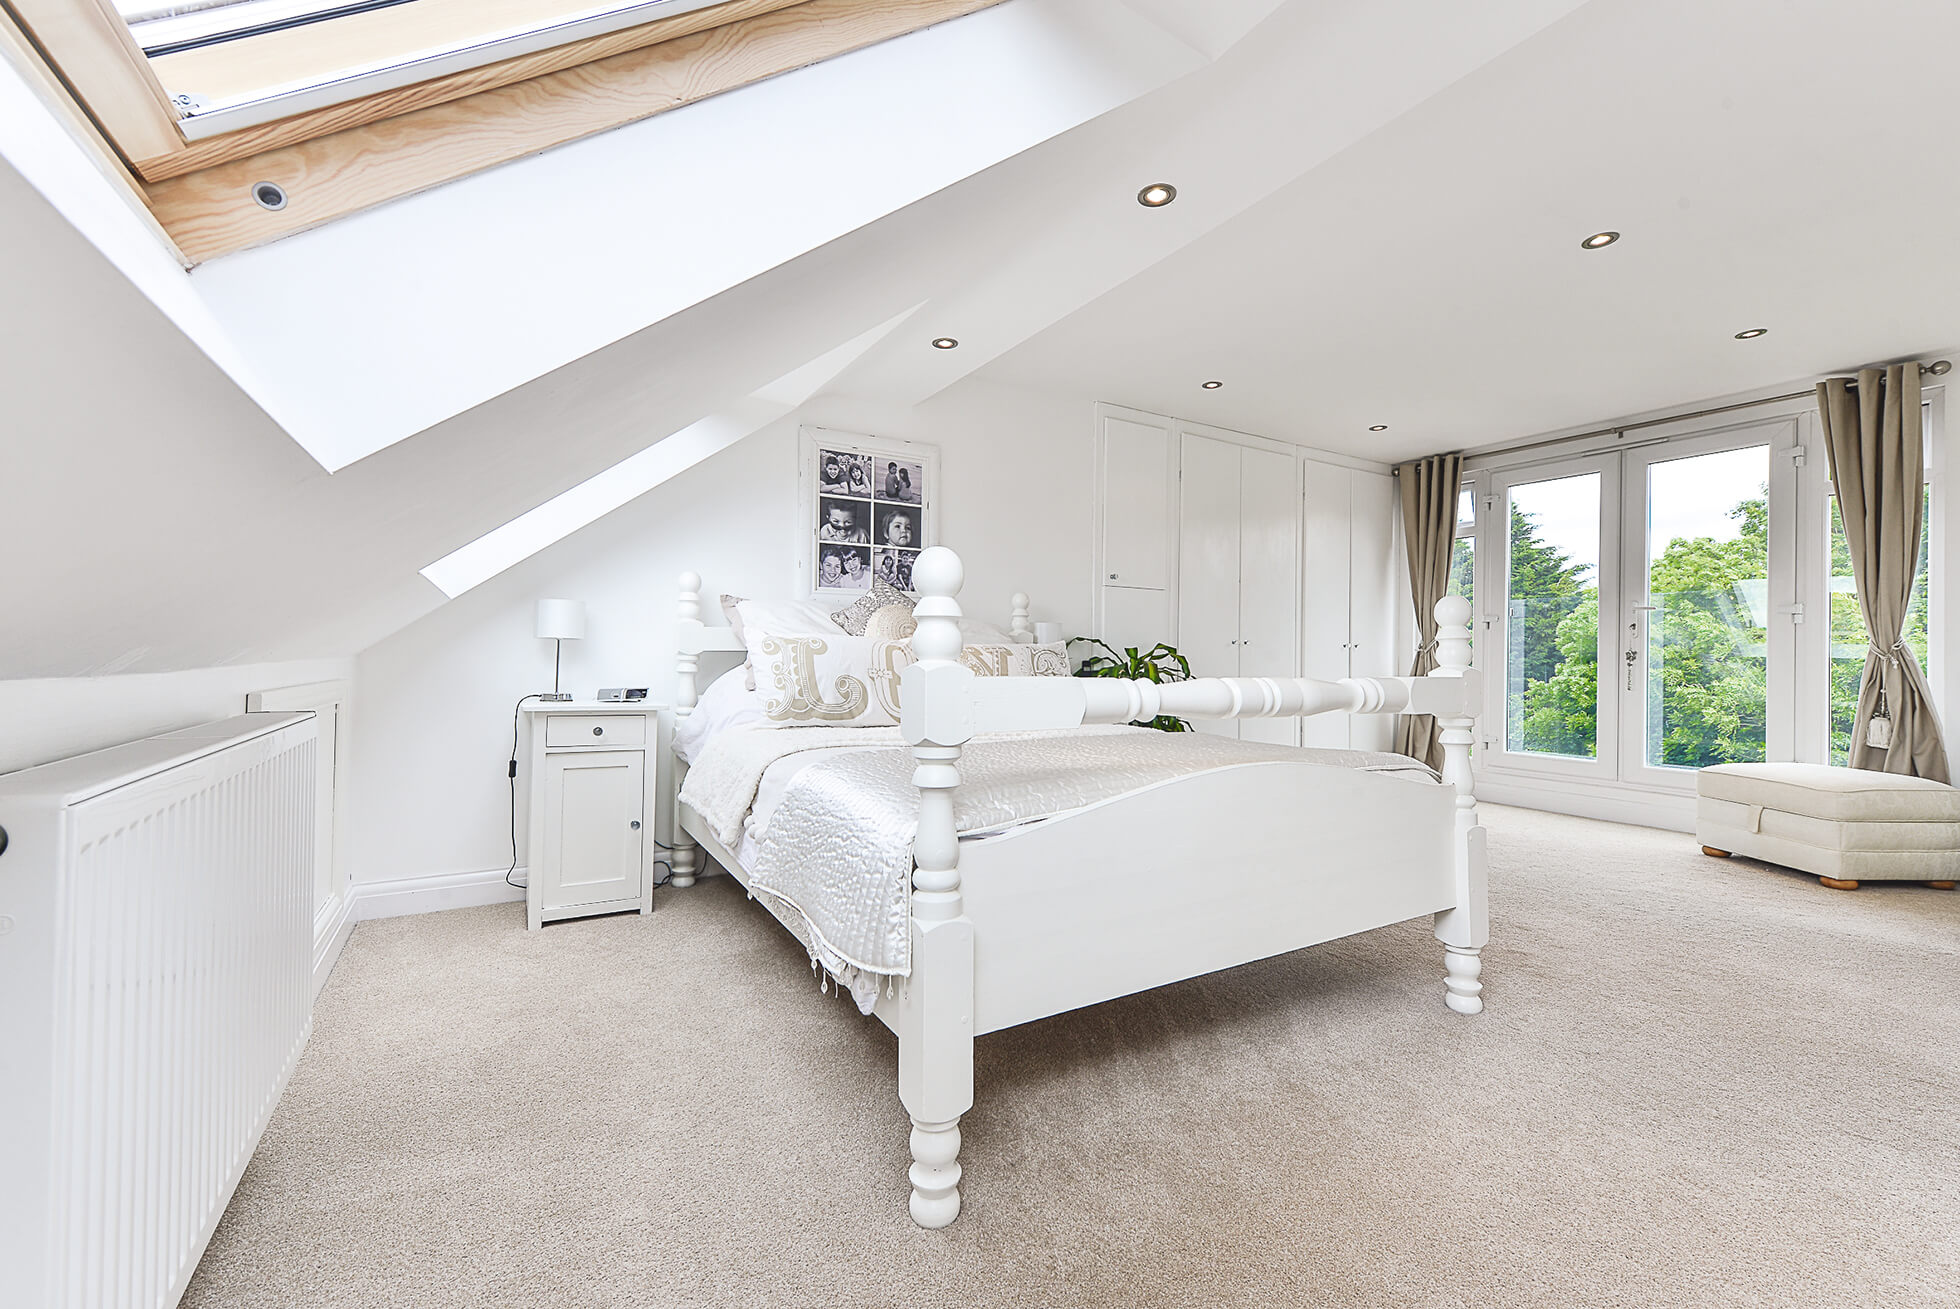 Do you have a question about converting your Loft in Ardeley? Here are the most popular questions asked by our clients.